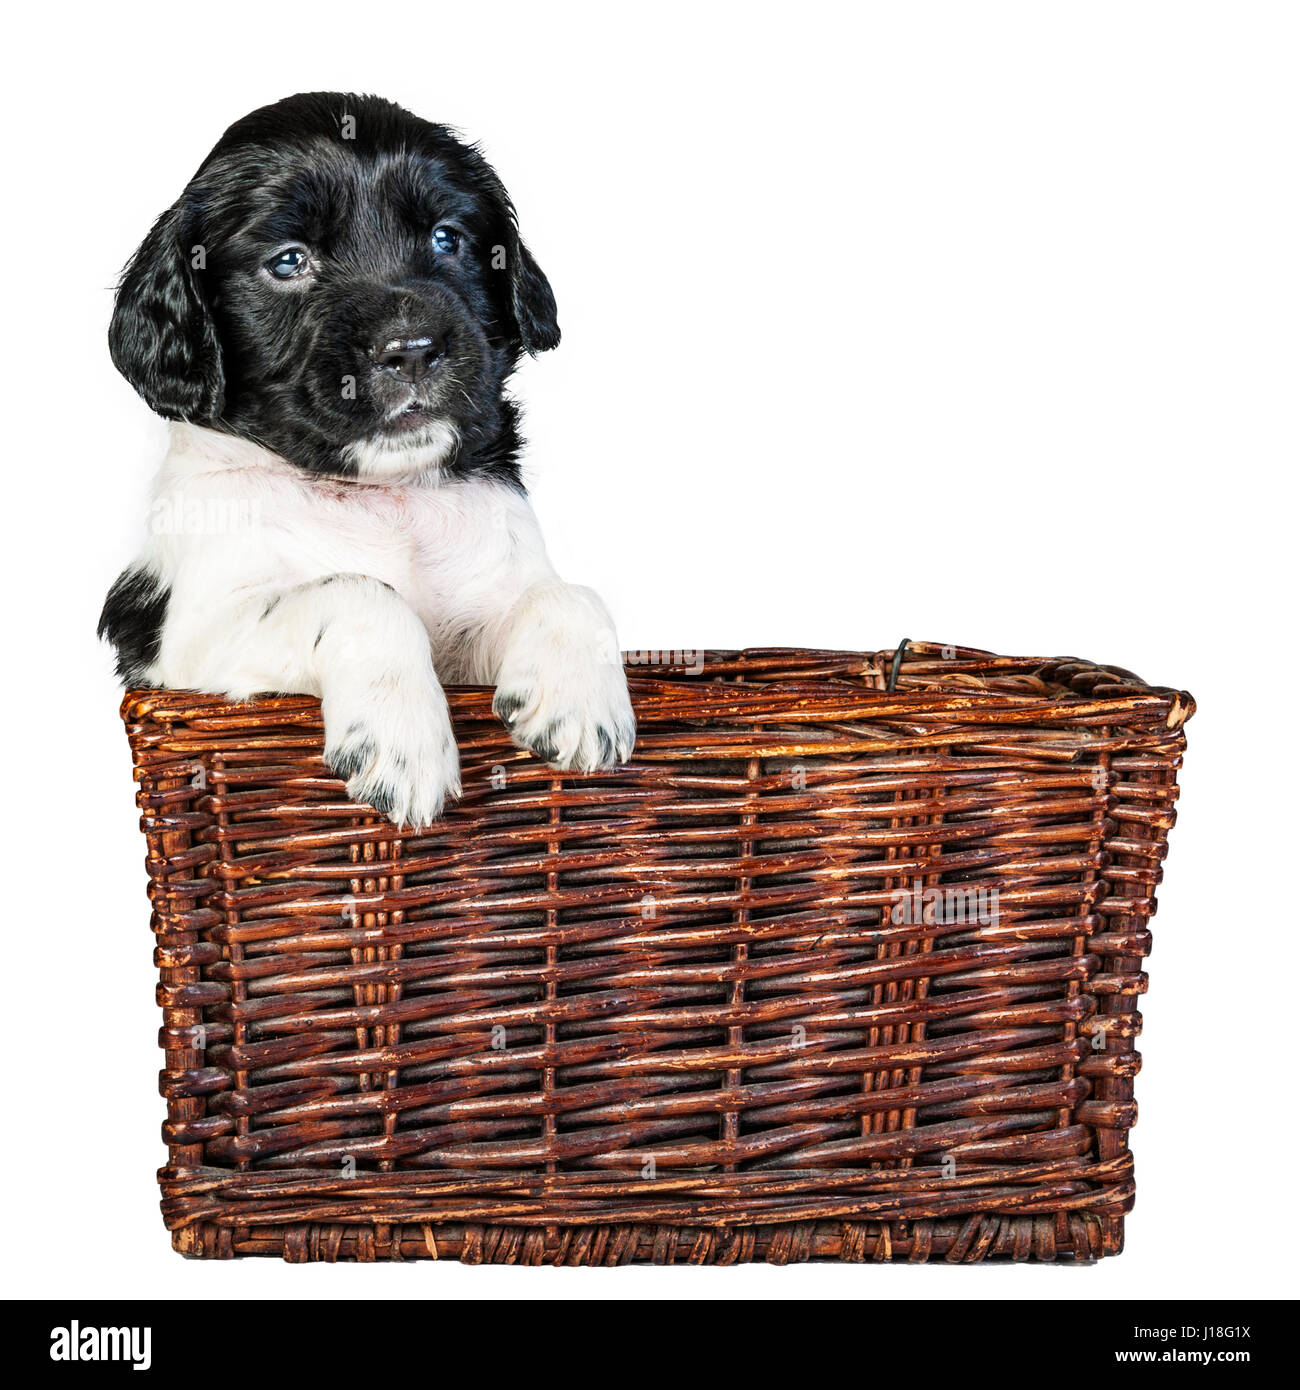 A 4 week old black and white English Springer Spaniel puppy in a wicker basket Stock Photo